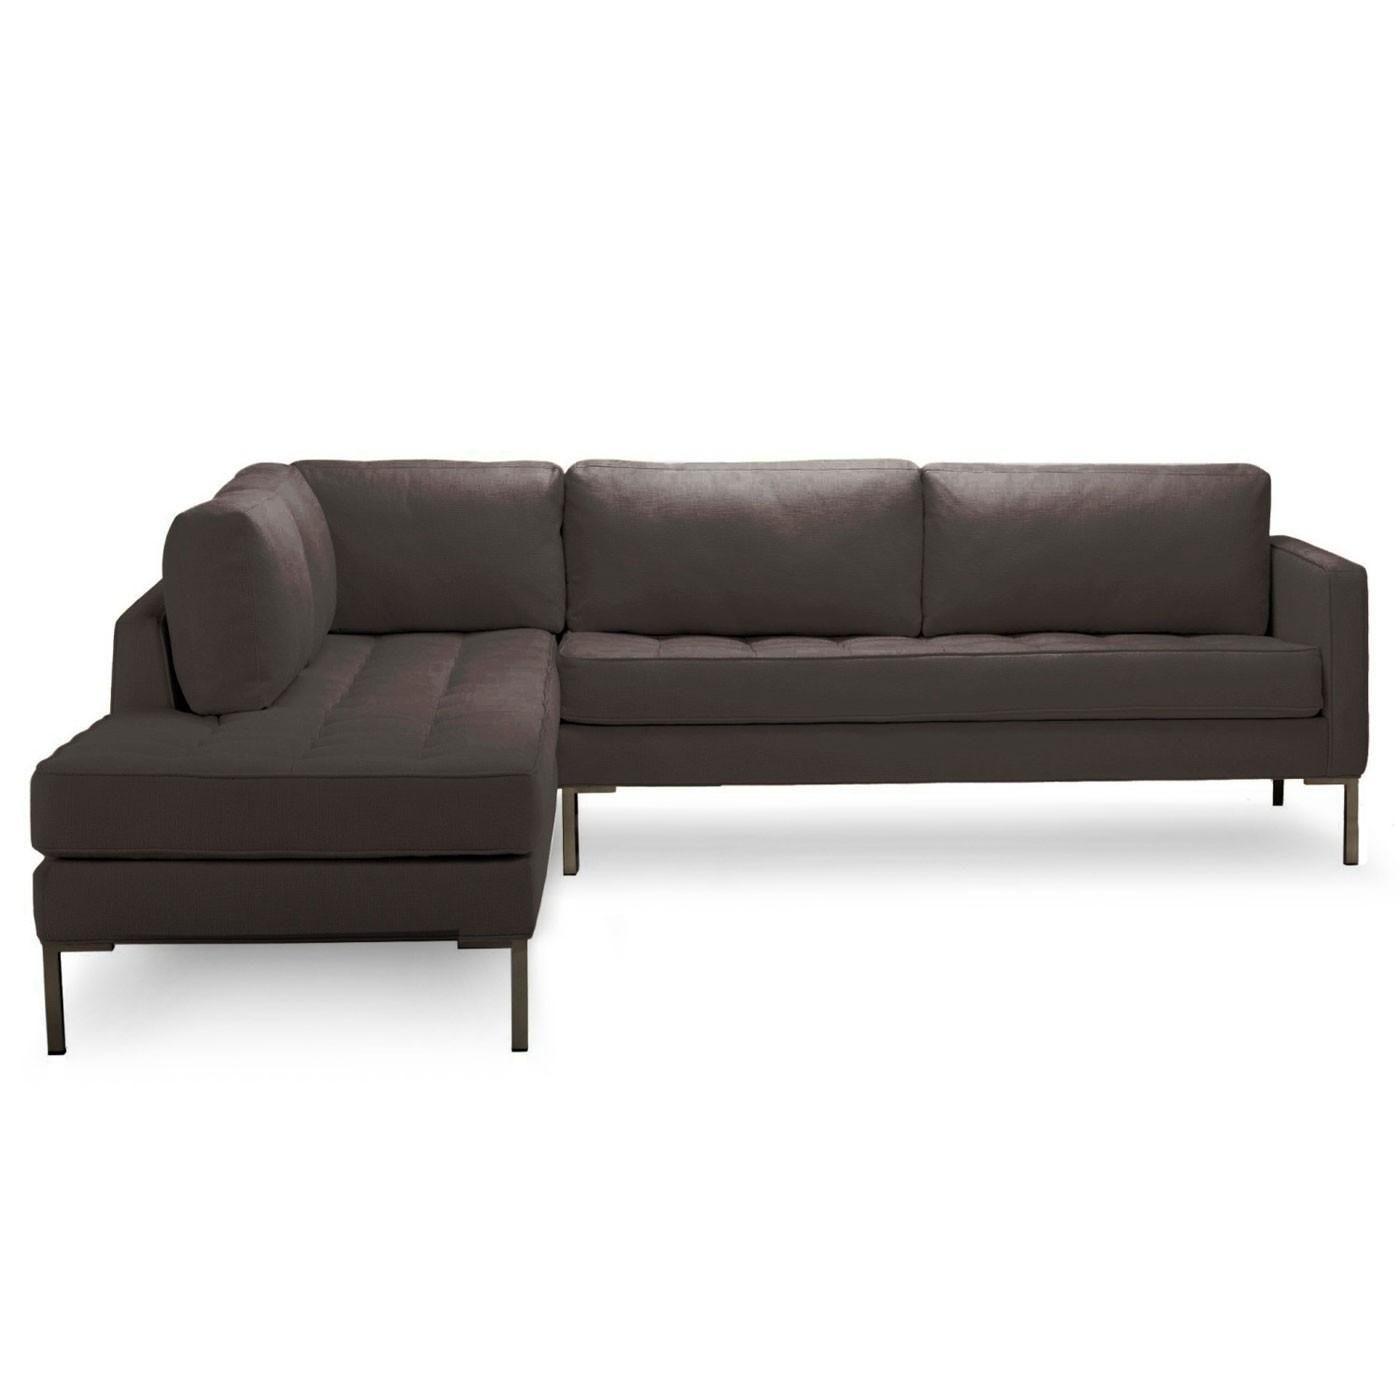 Furniture: Very Stylish L Shaped Sectional Couches For Recommended In Modern Small Sectional Sofas (View 17 of 20)